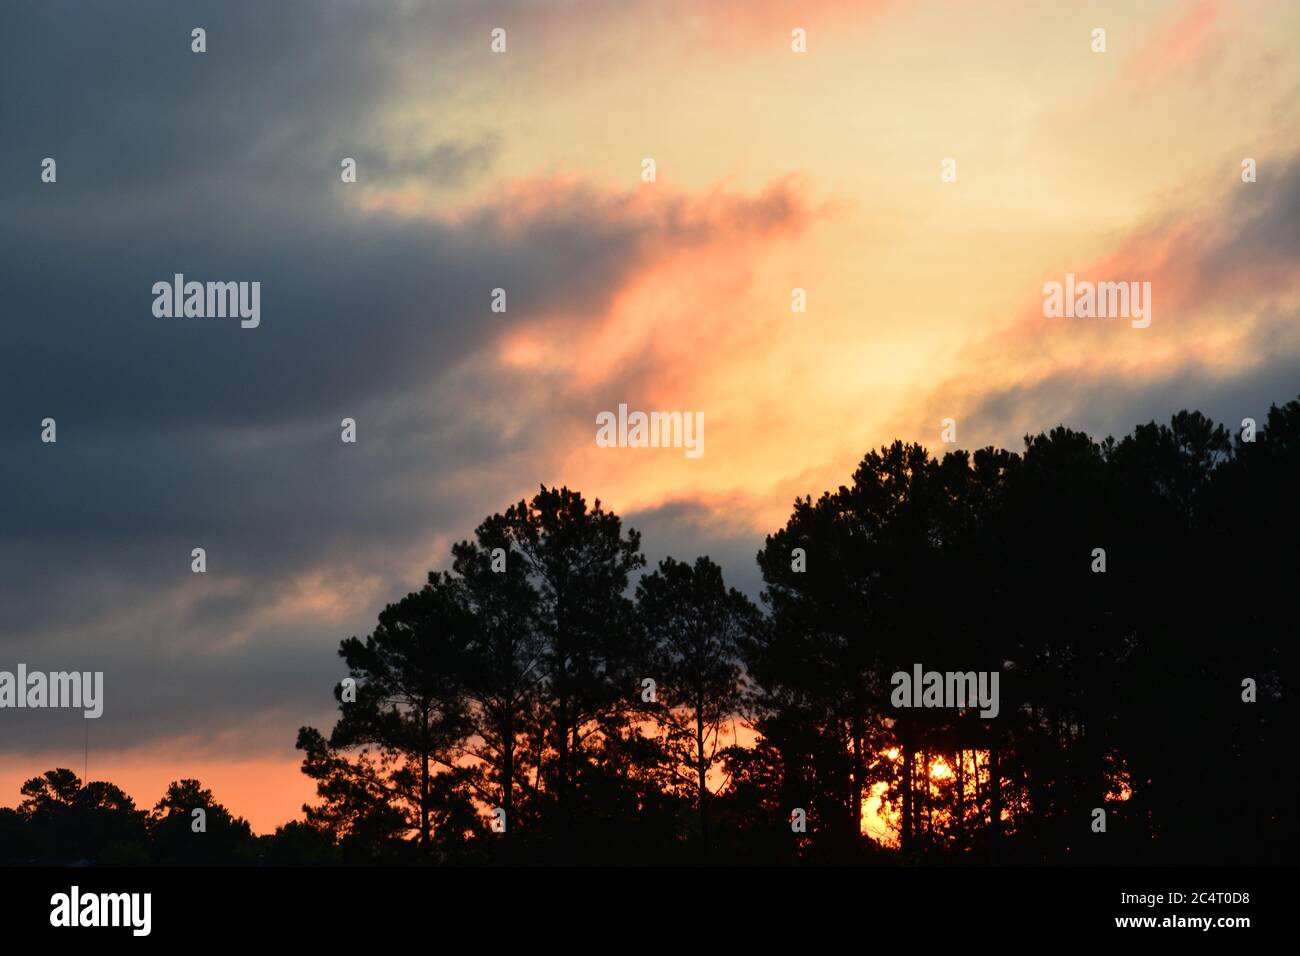 Saharan dust leads to a glowing sunrise over pine trees in Raleigh, North Carolina. Stock Photo